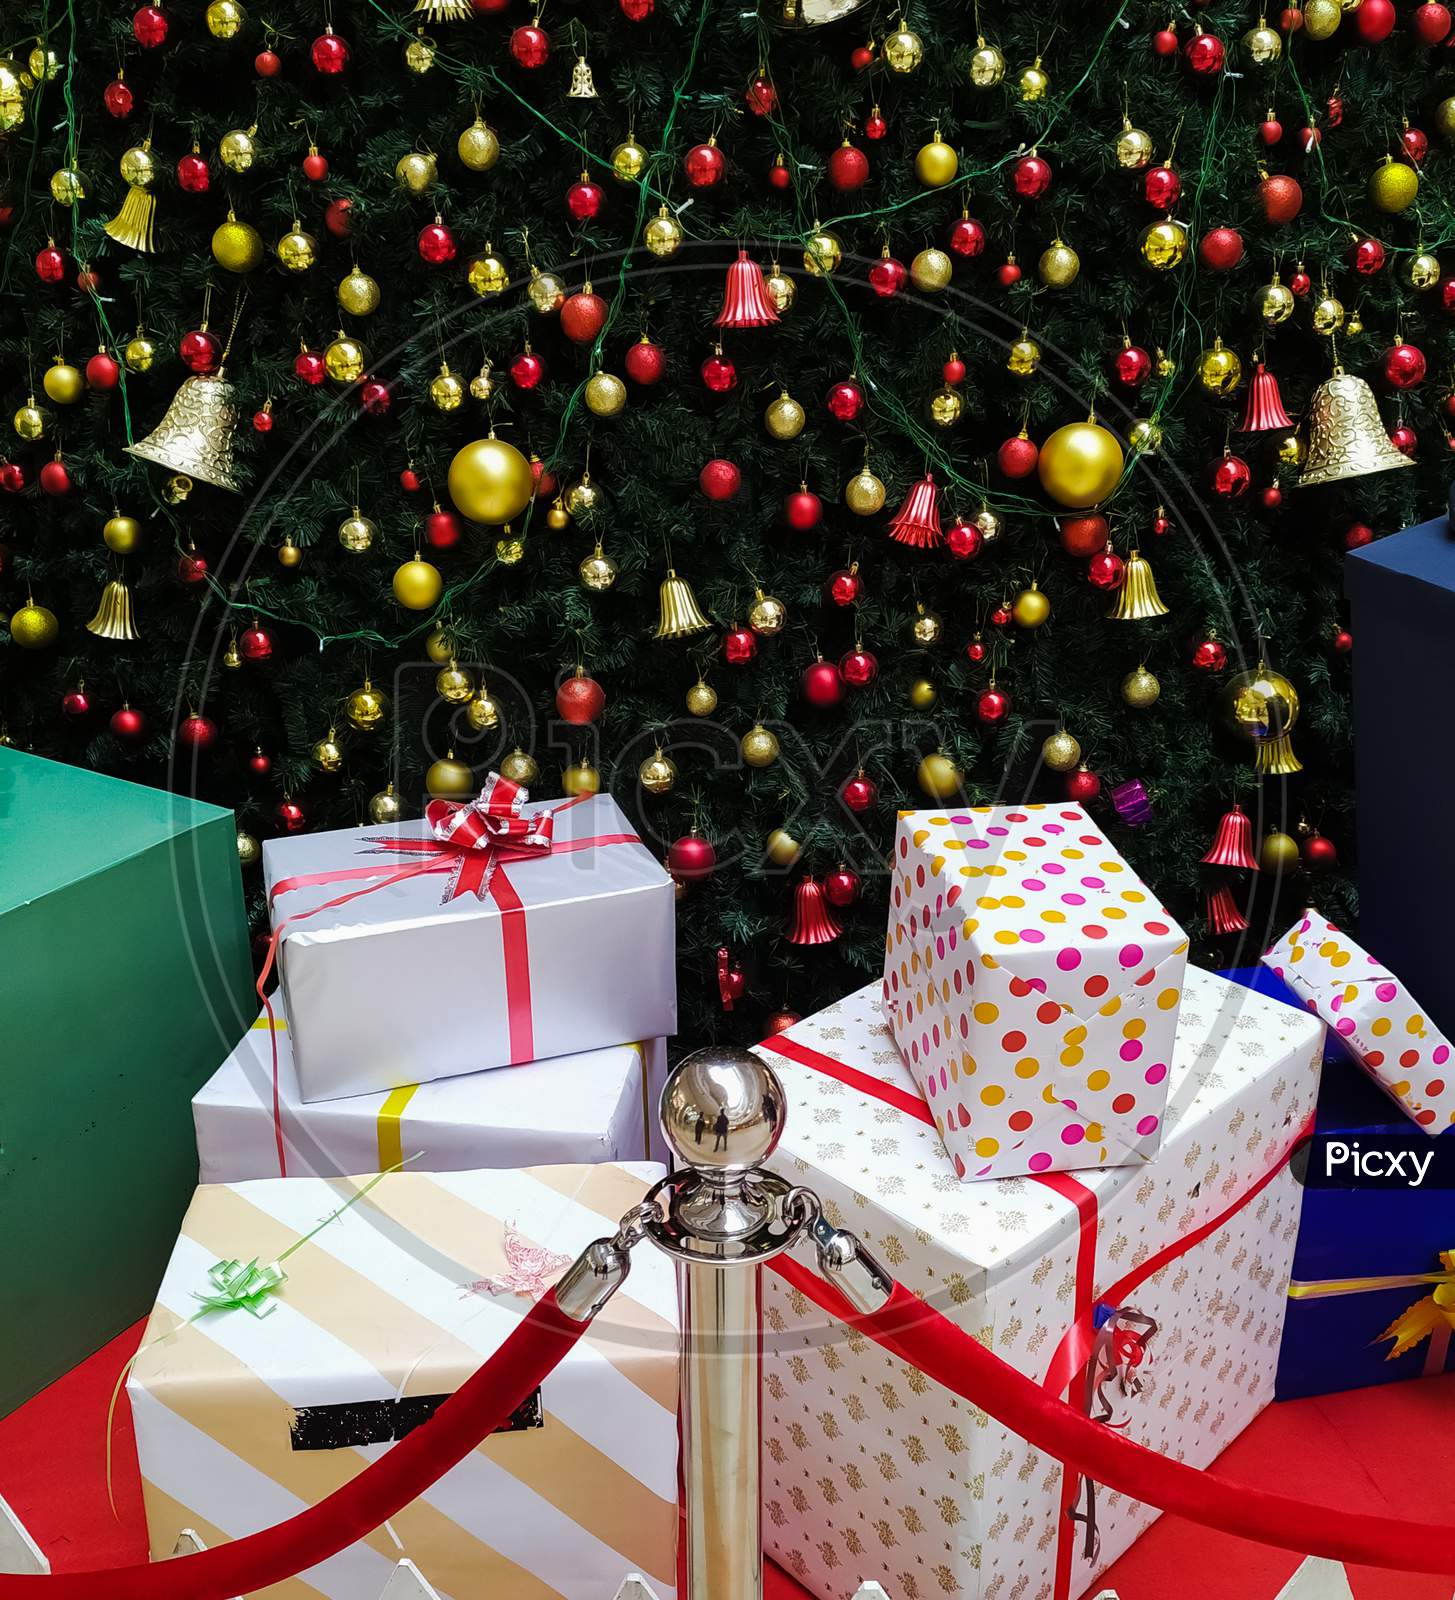 Christmas gift boxes in decorated Christmas tree background